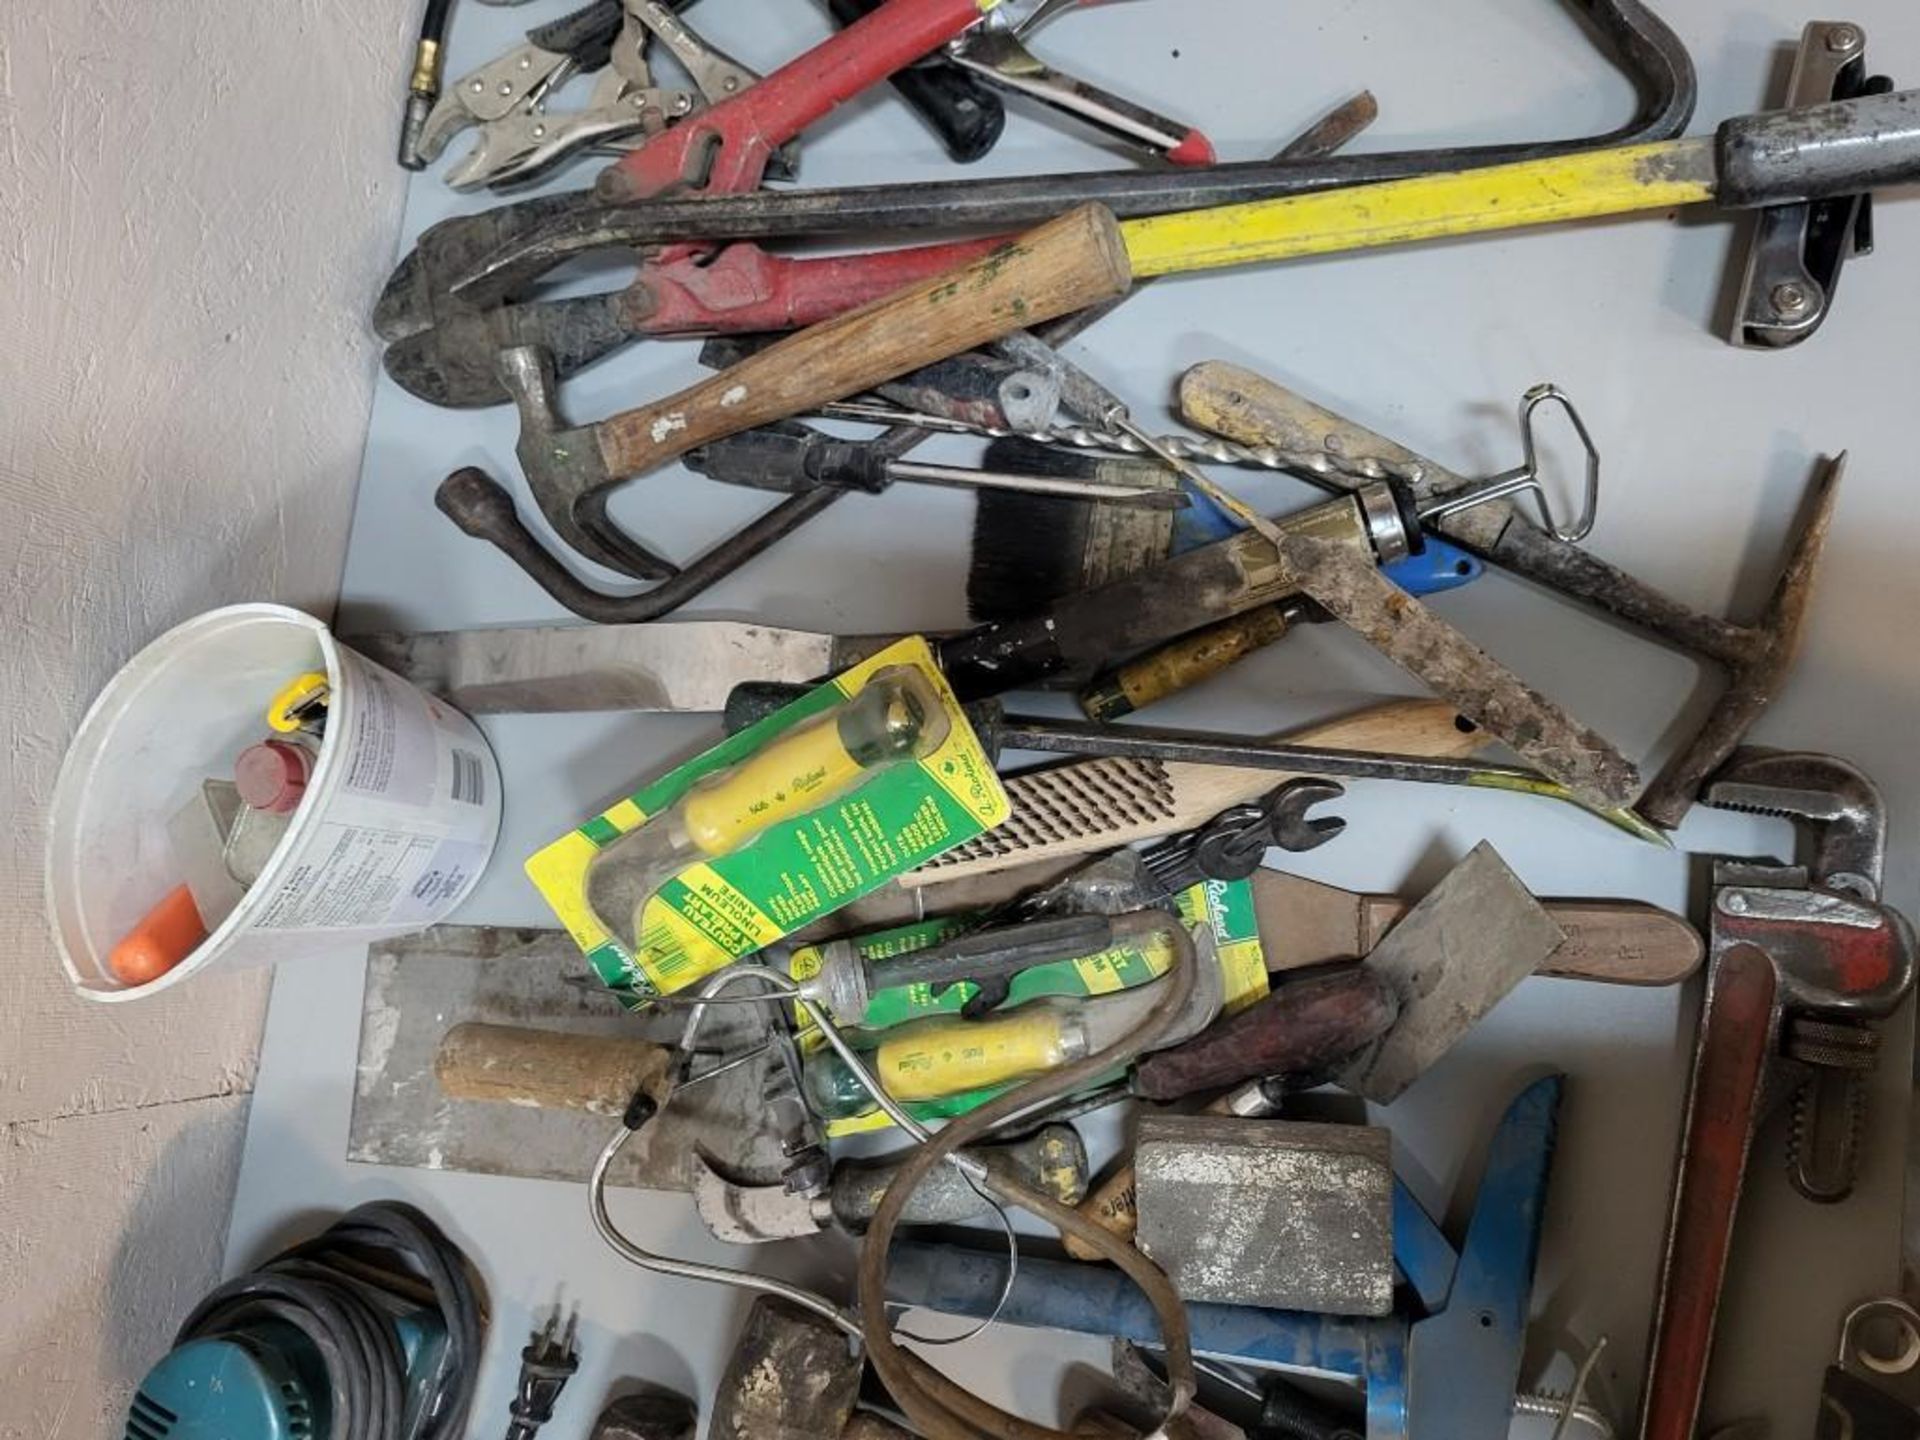 VALUE LOT Of Hand Tools And Power Tools - Image 9 of 15